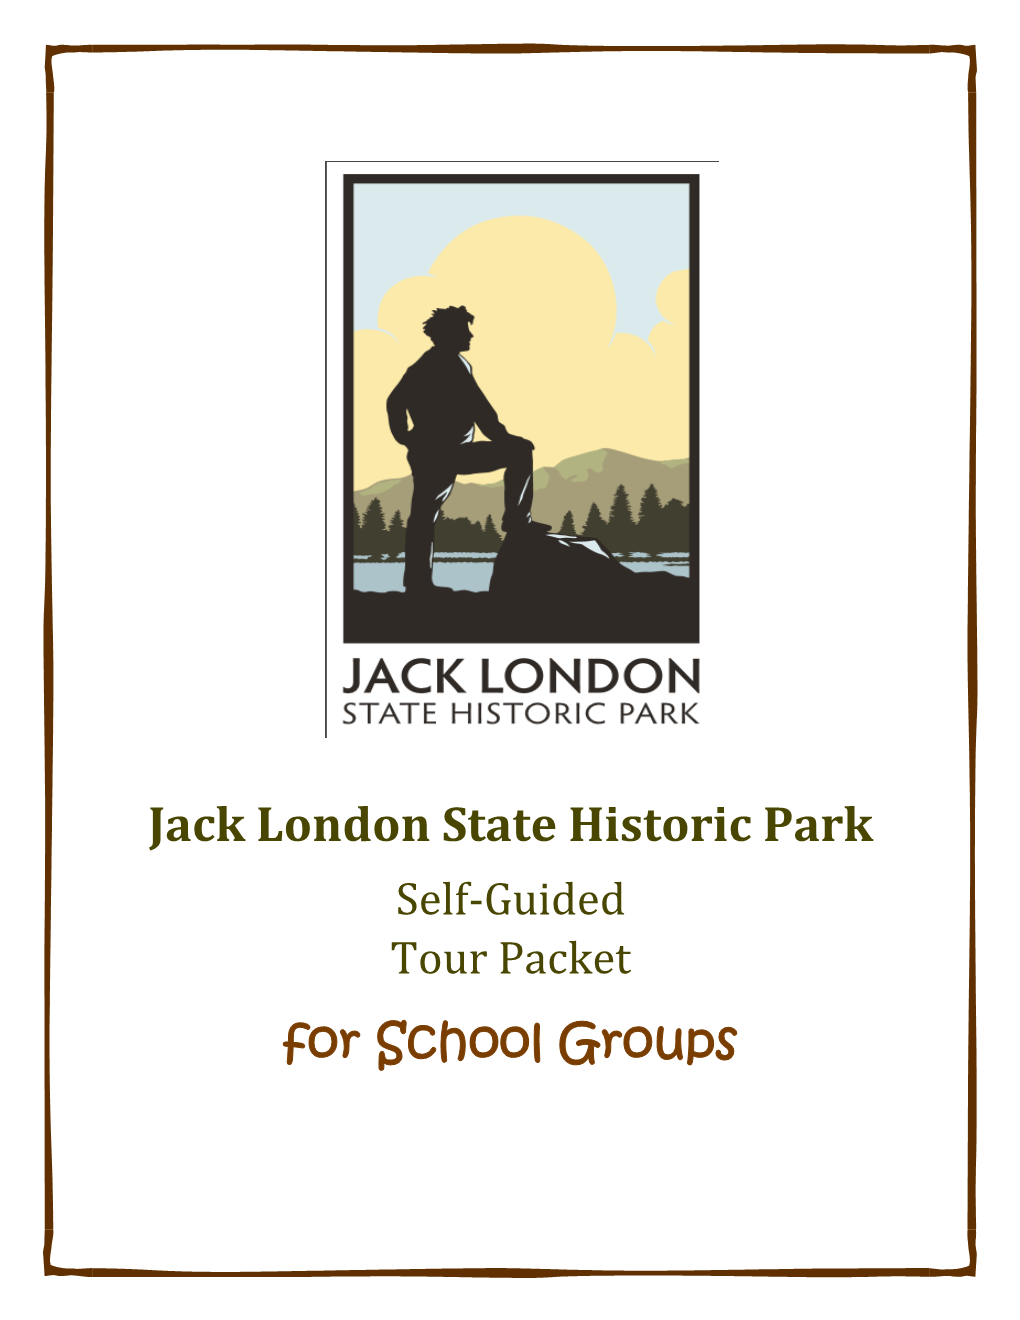 Jack London State Historic Park for School Groups